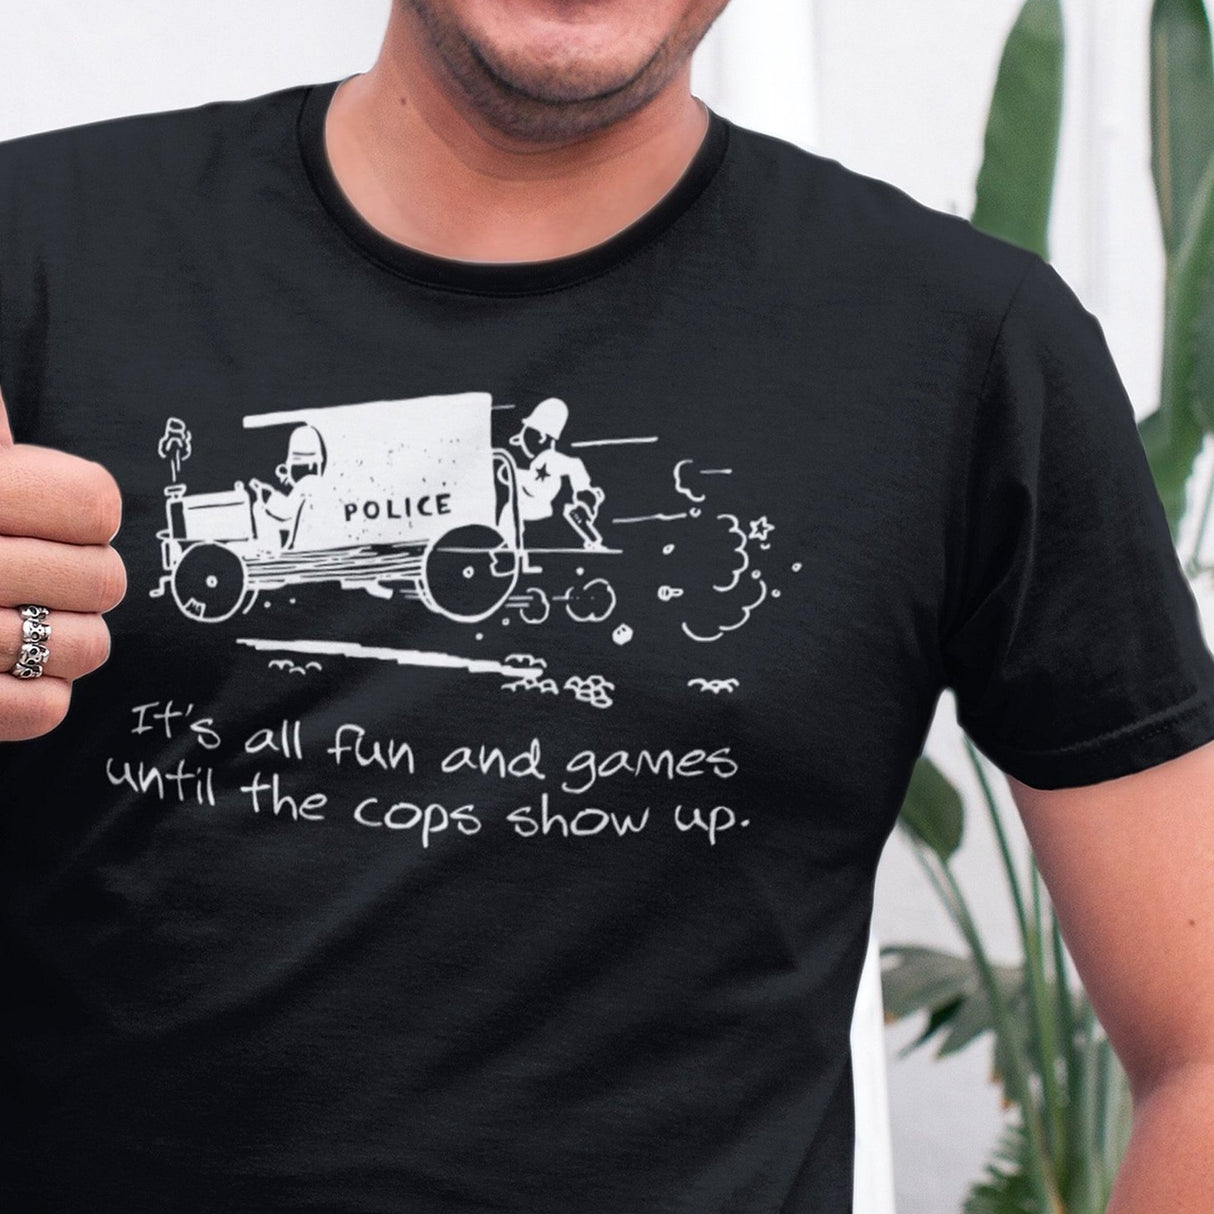 its-all-fun-and-games-until-the-cops-show-up-games-tee-humor-t-shirt-cops-tee-funny-t-shirt-truth-tee#color_black